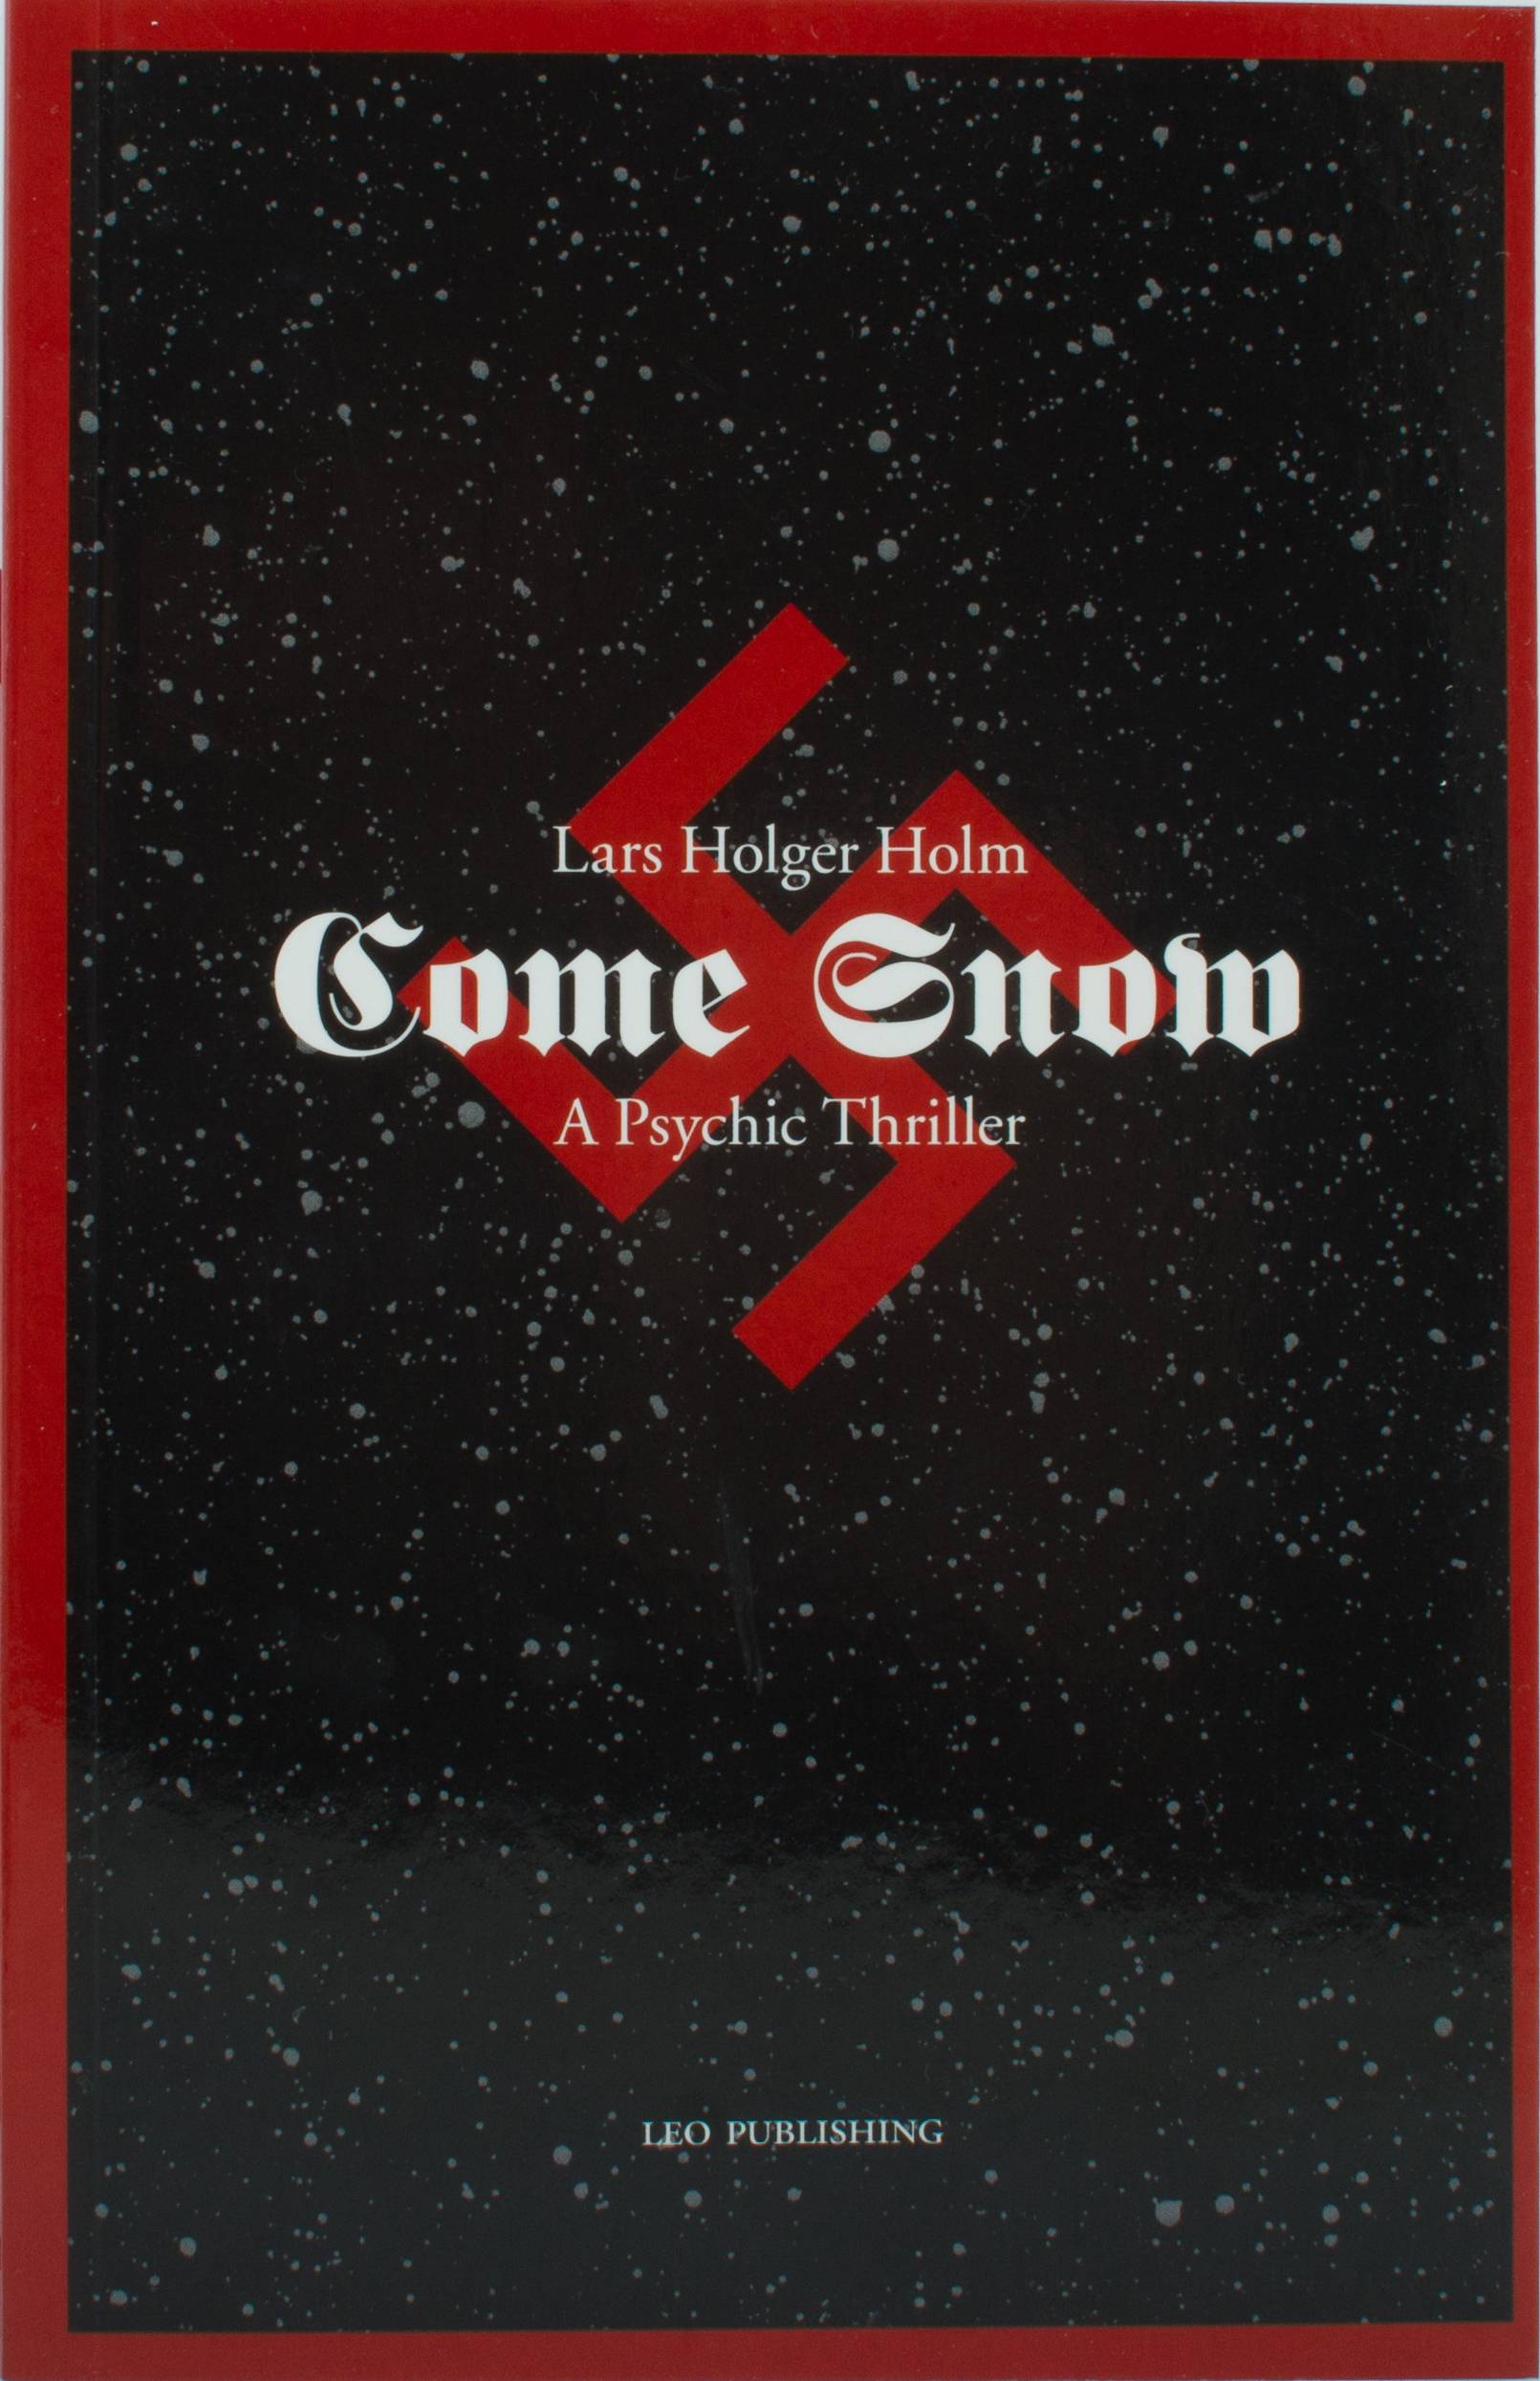 Come Snow - A Psychic Thriller